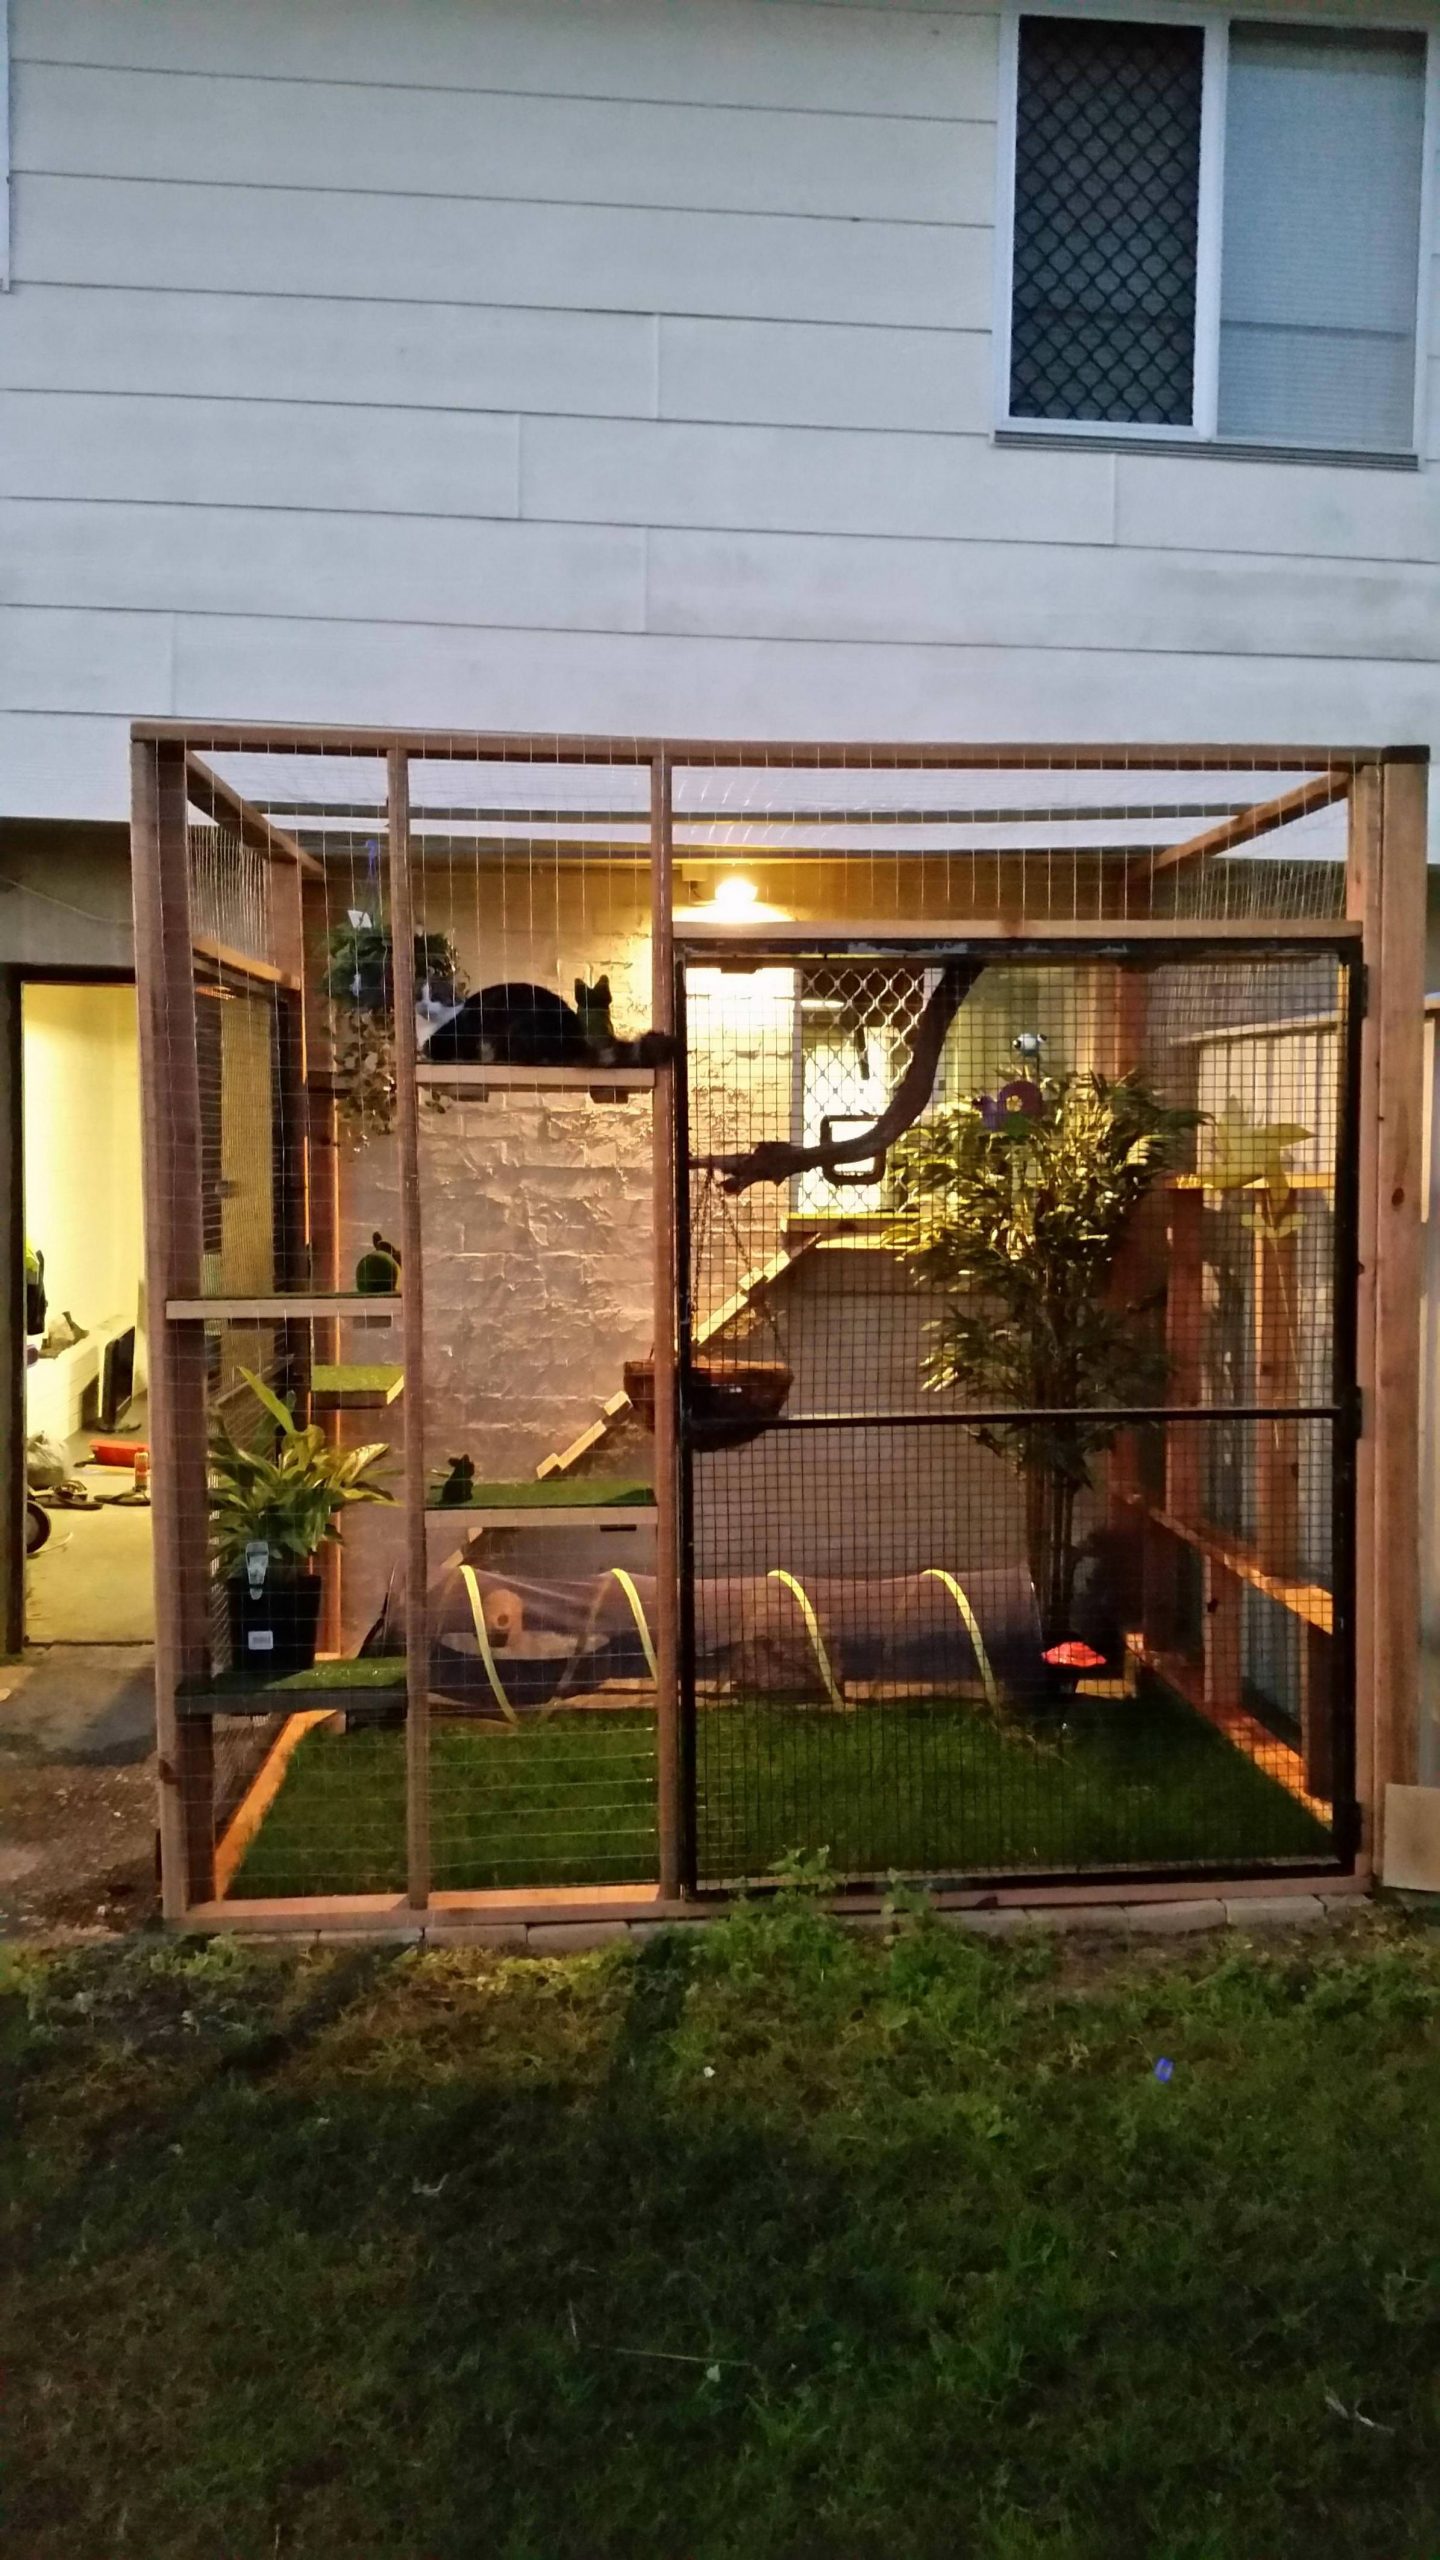 Catio for our indoor kitty